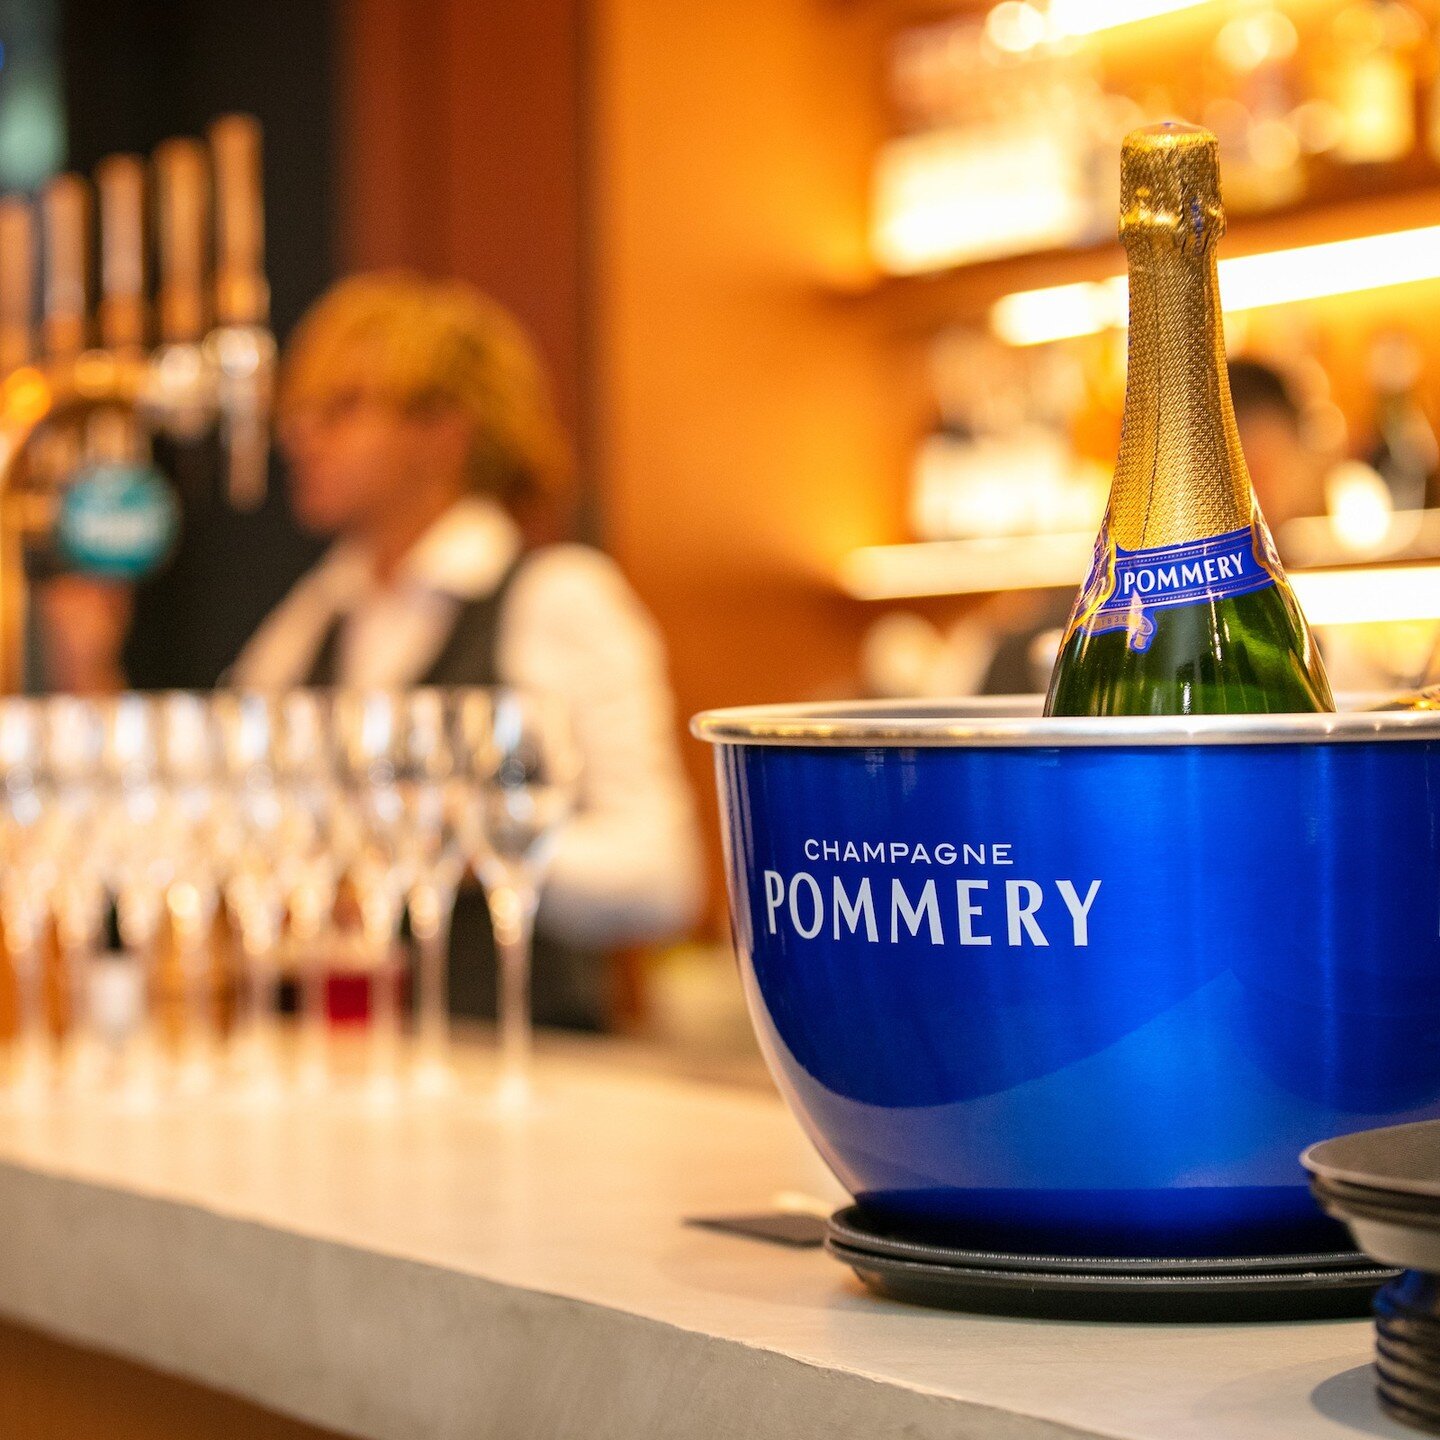 It must be nearly time for a glass of bubbles?
@champagnepommery #champagne #fridayfeels #fridayfeeling #treatyourself #fridayinspiration #fridayinspo